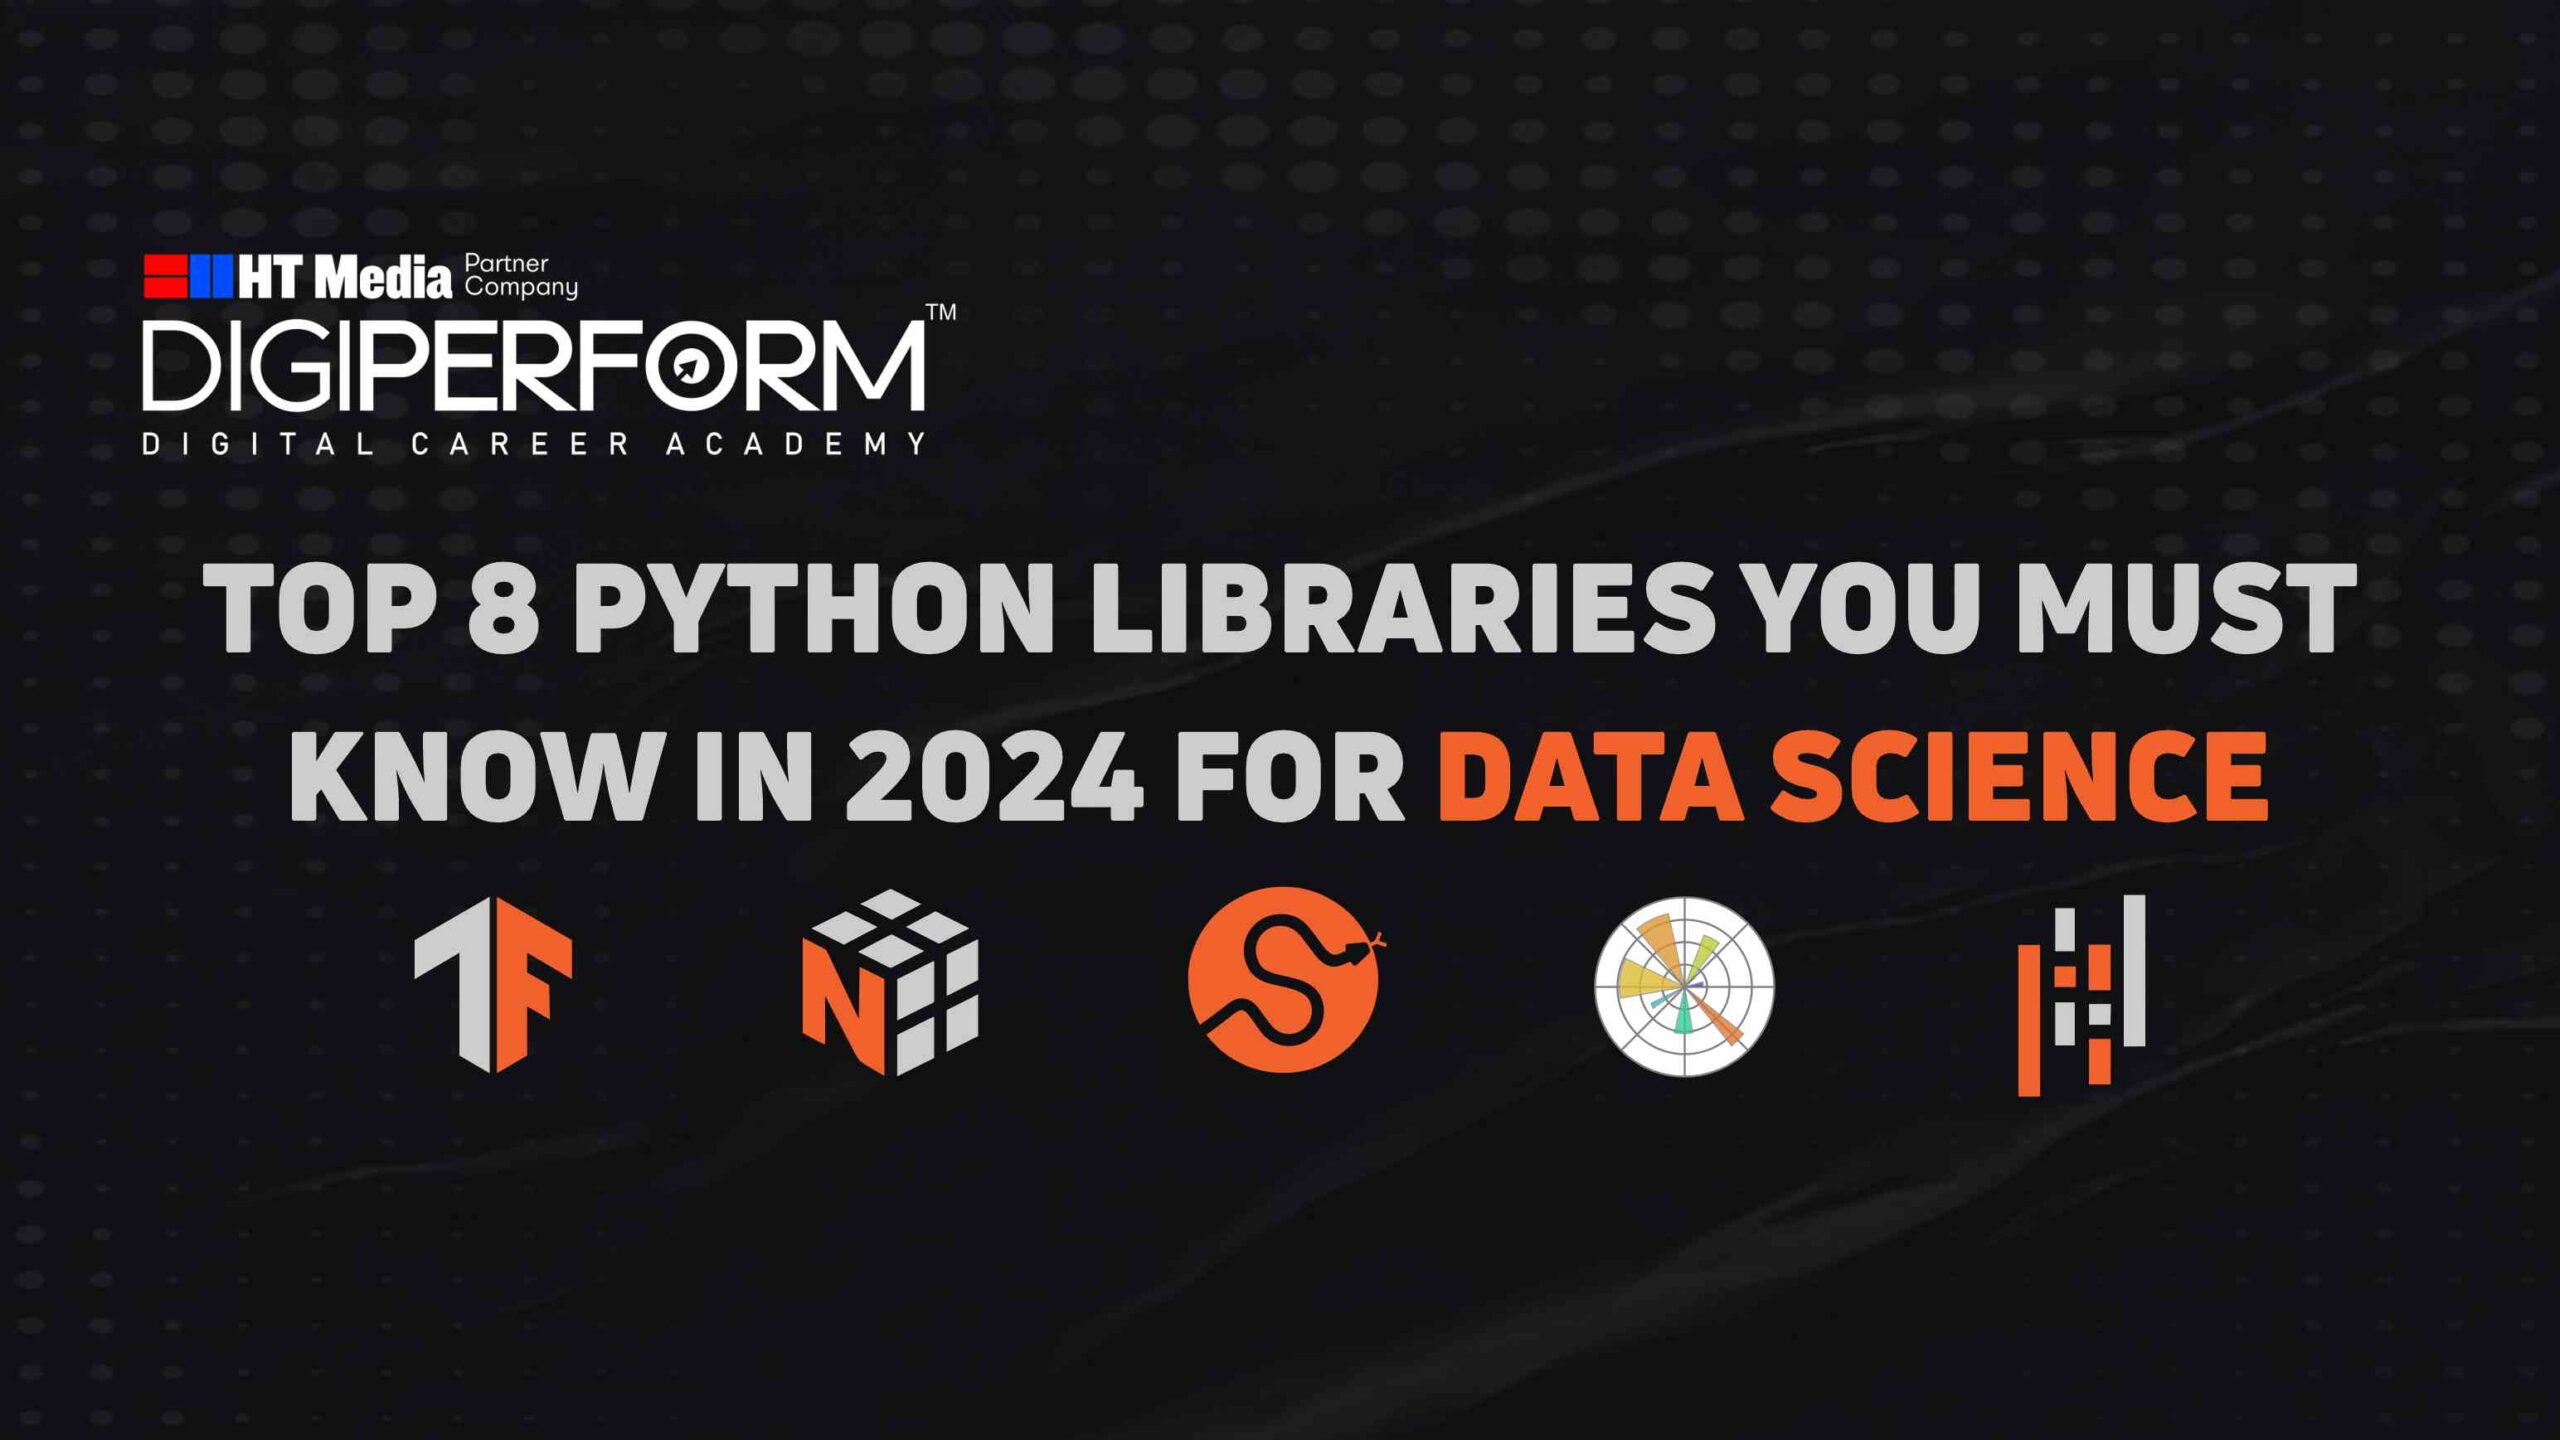 Top 8 Python Libraries You Must Know in 2024 For Data Science